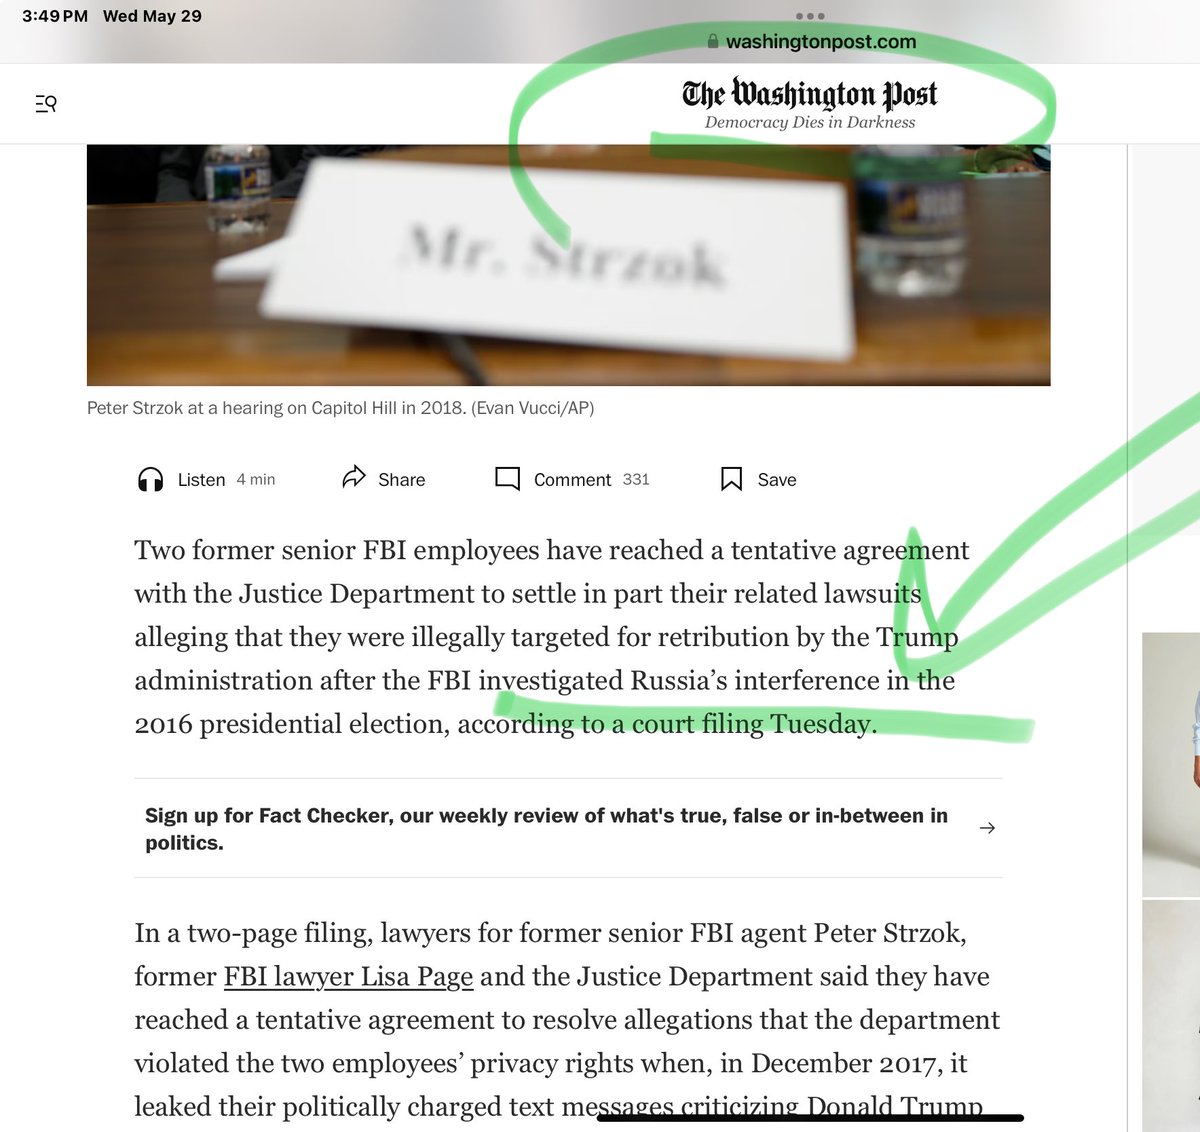 Dear ⁦@washingtonpost⁩ ….”investigated Russia’s interference” or ALLEGED? What was proven? If proven, Washington post is correct…if not, Washington post is conveying what the editor thinks (which might not be fact)